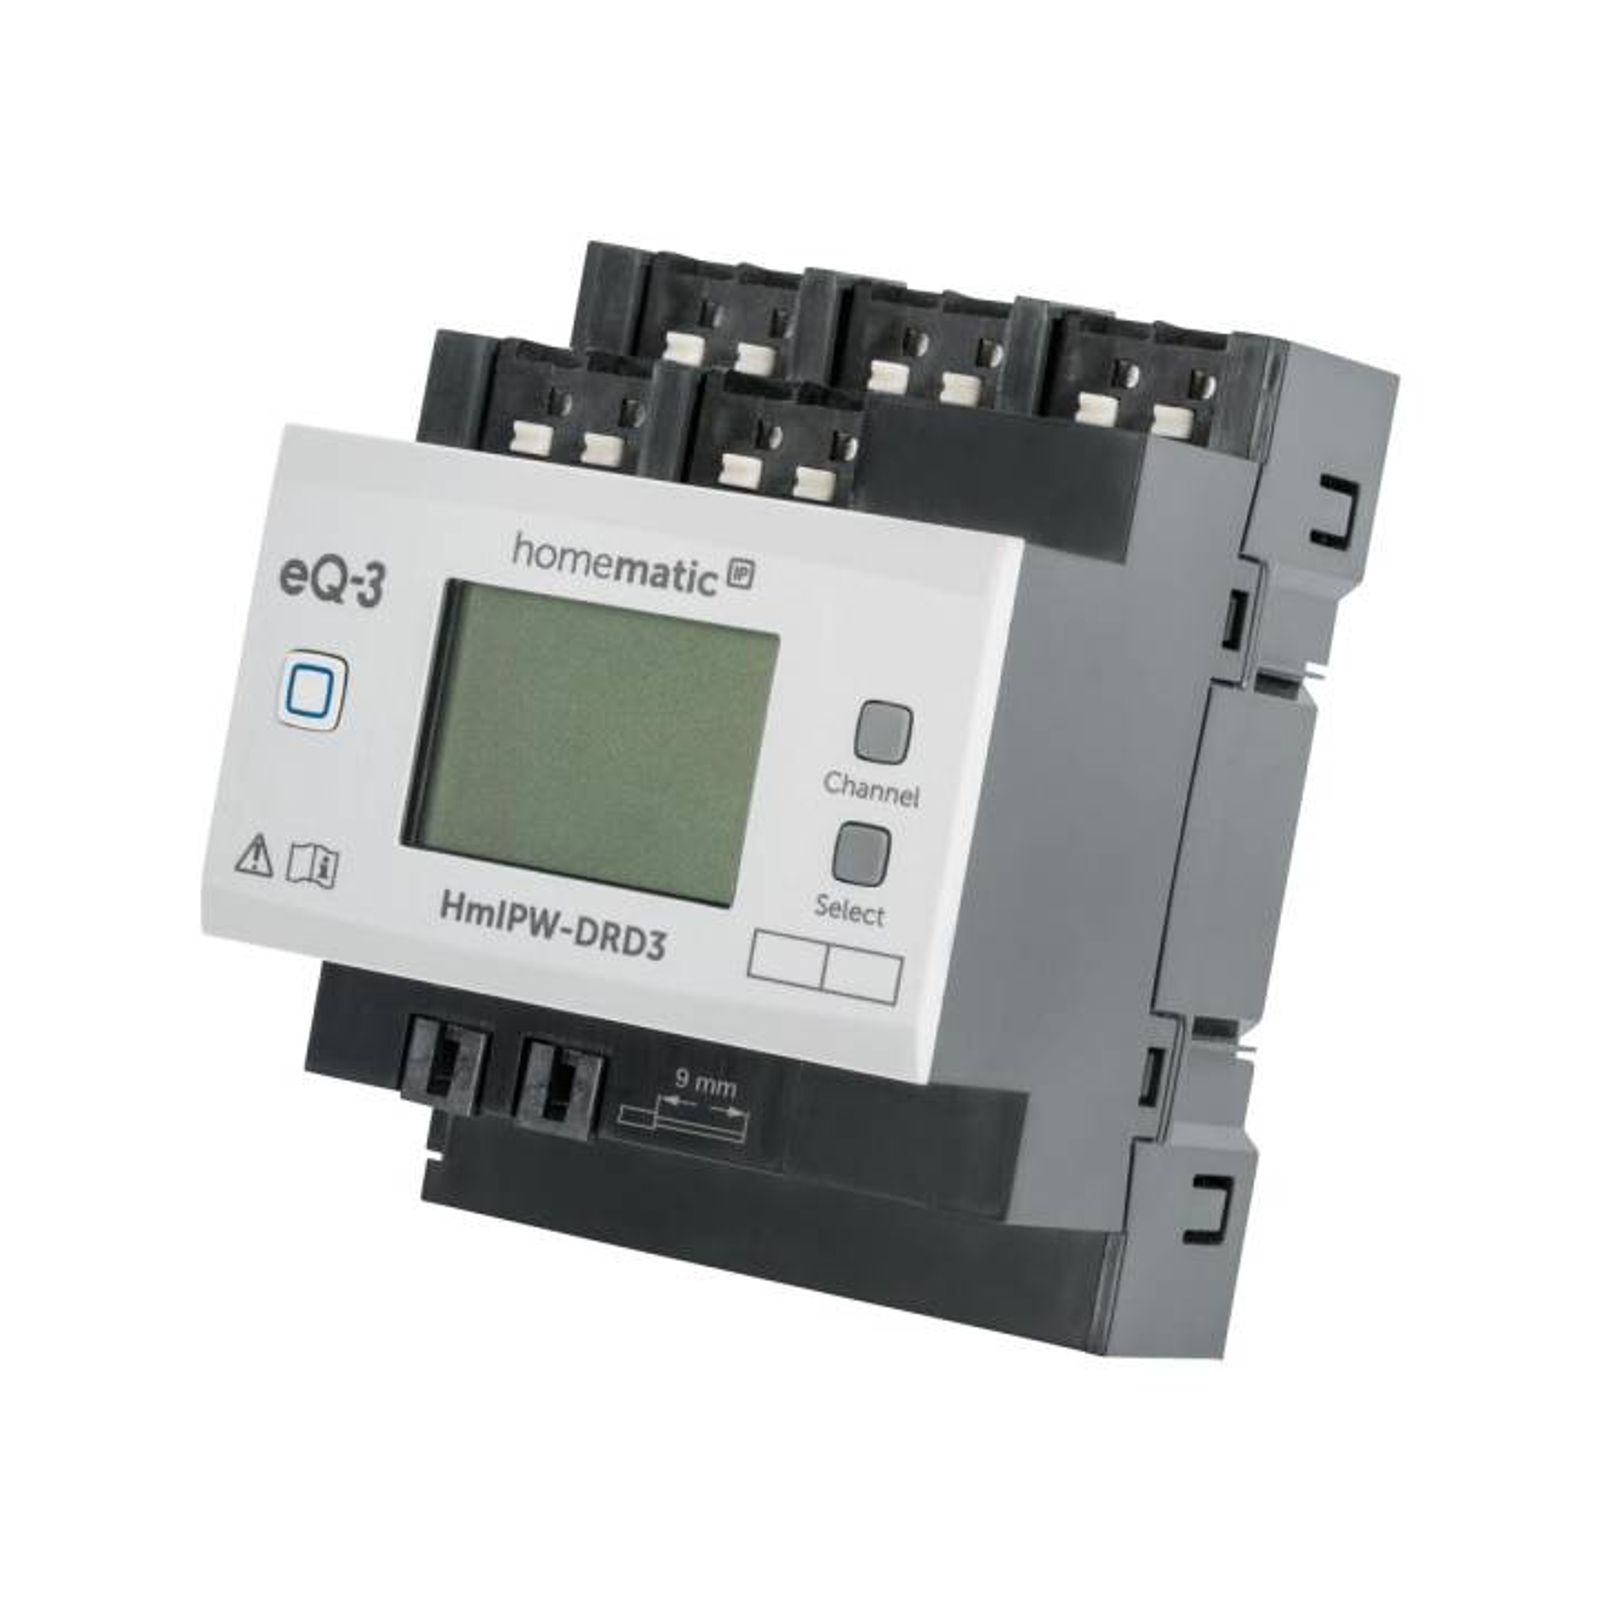 Homematic IP Wired Smart Home Dimmaktor HmIPW-DRD3 - 3-fach